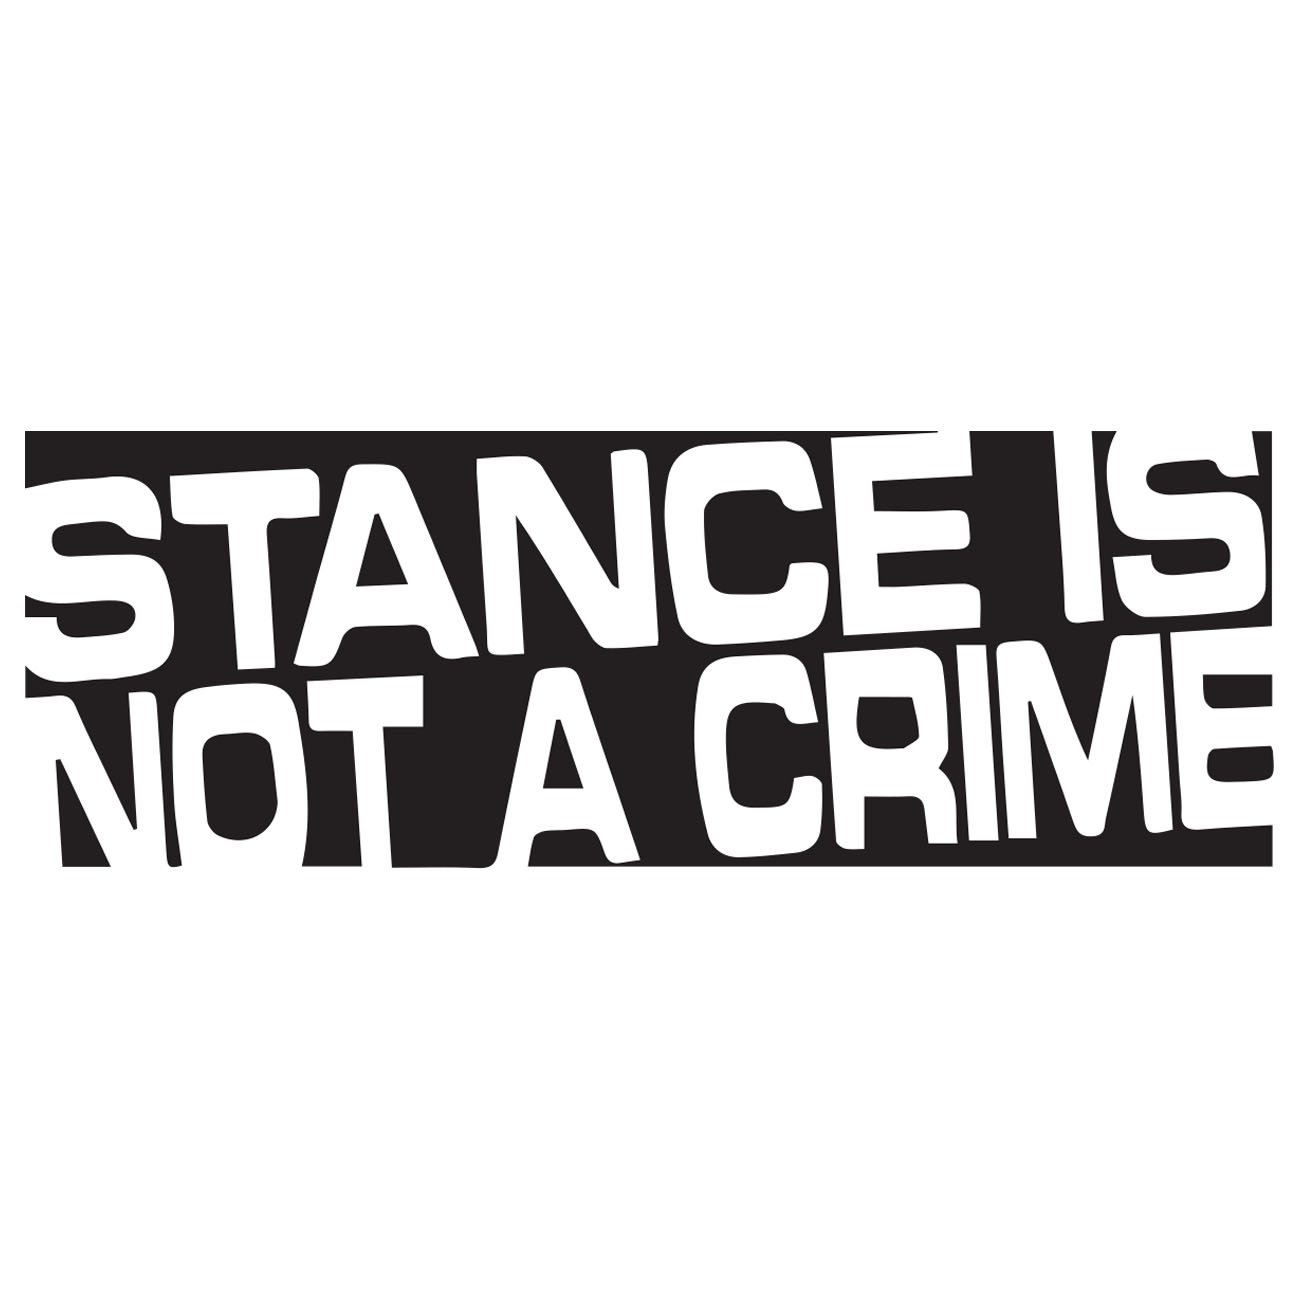 Stance is not a crime